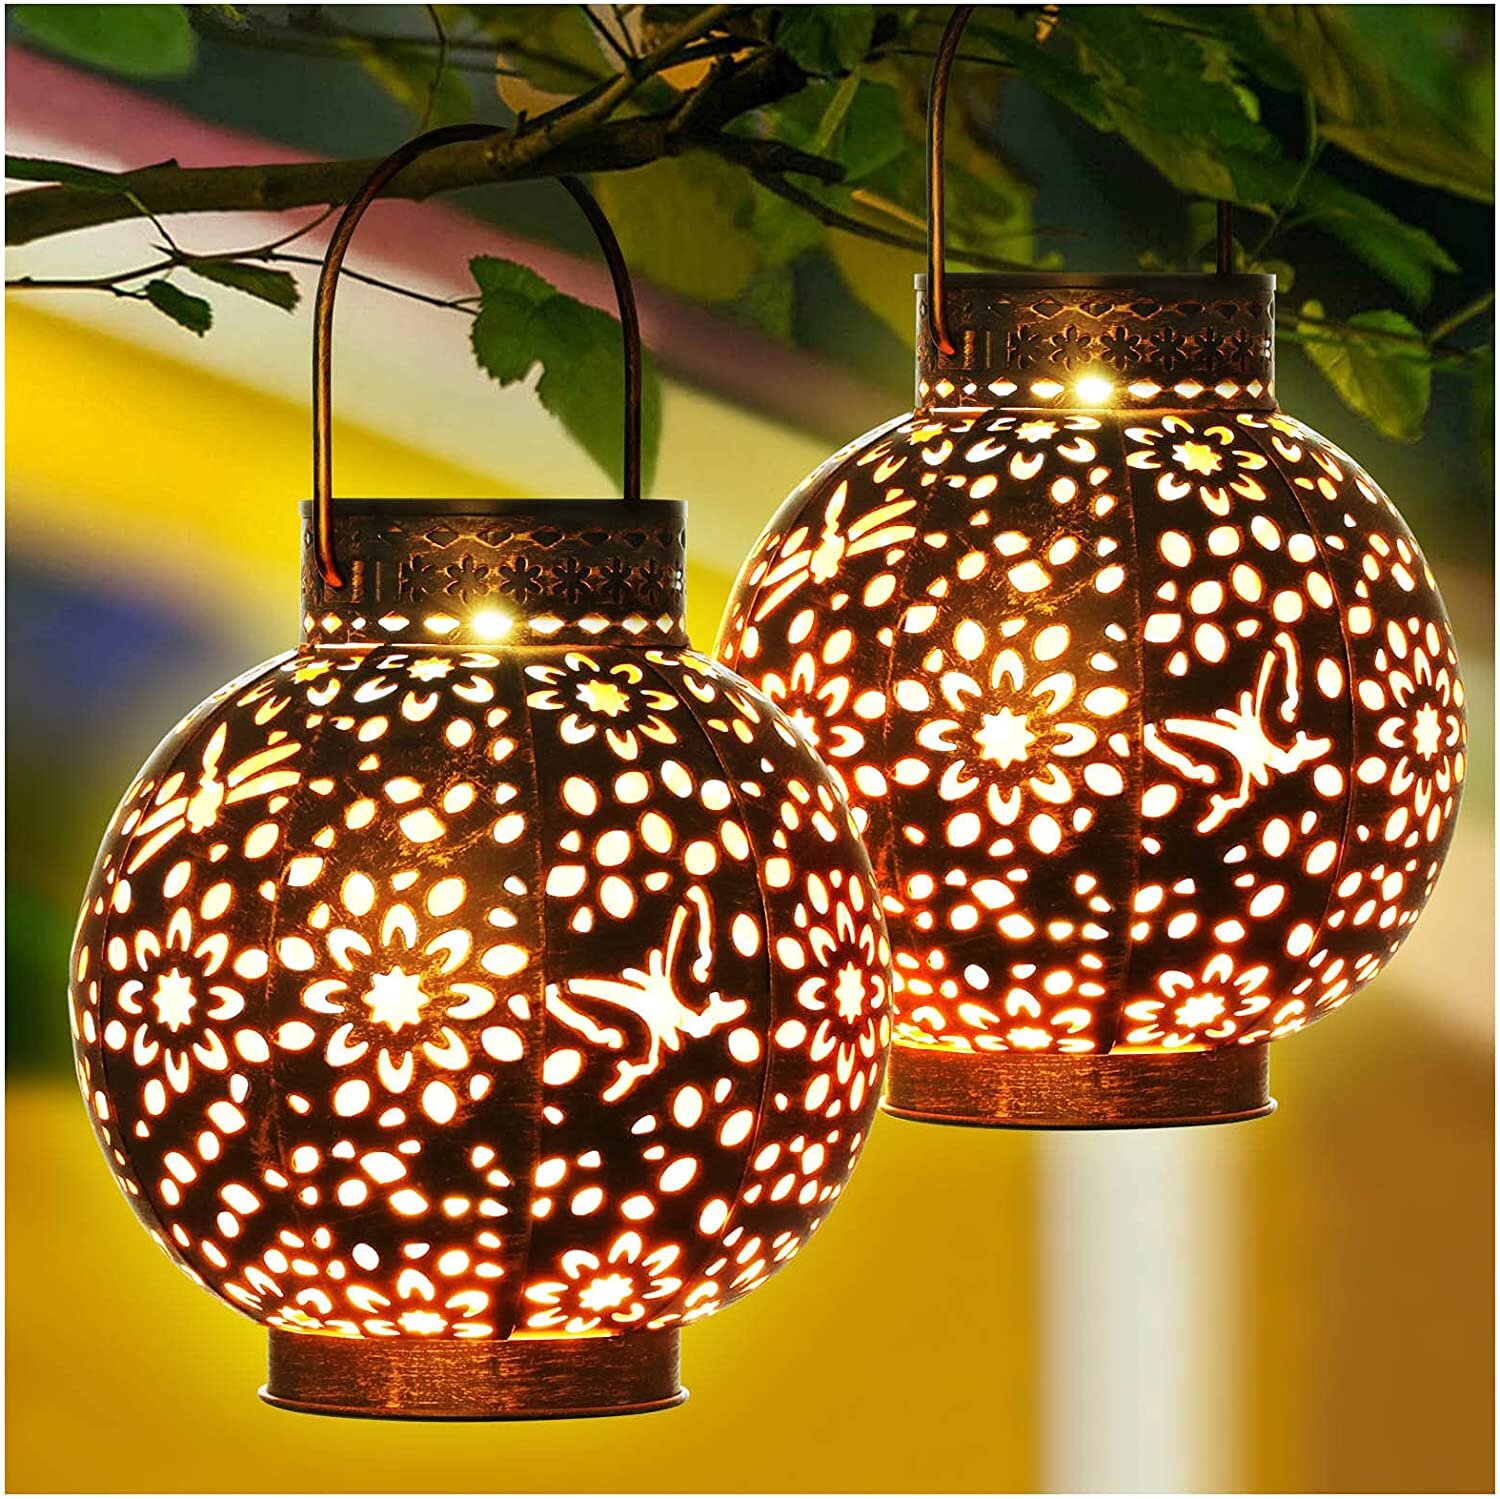 7-Color Hanging Solar LED Changing Light Garden Crystal Ball Party Tree Light